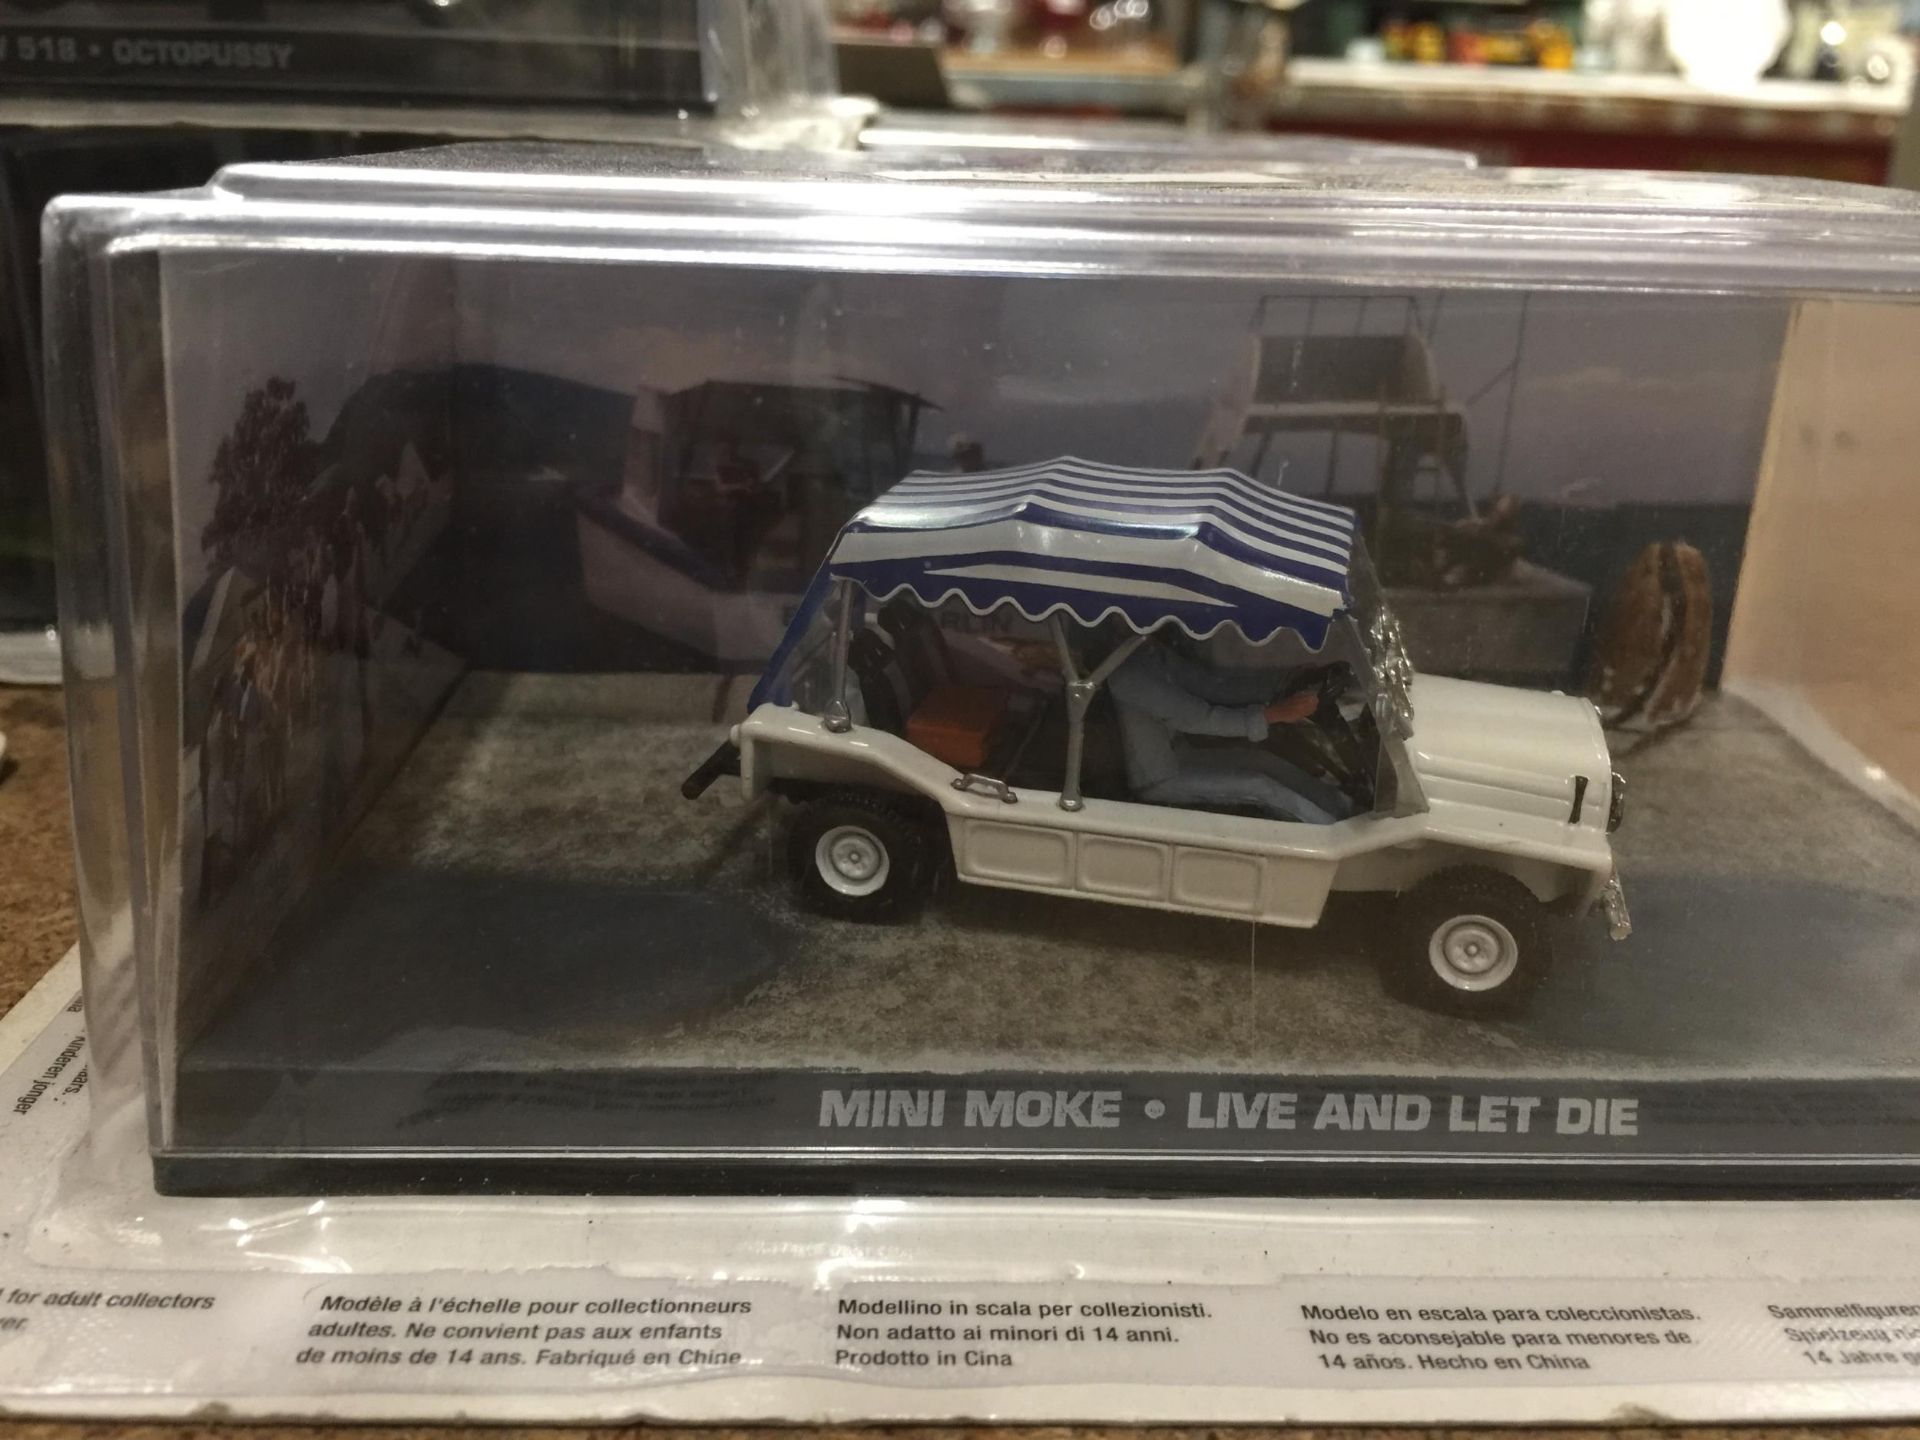 A COLLECTION OF JAMES BOND 007 VEHICLES TO INCLUDE A MERCEDES BENZ 250-SE FROM OCTOPUSSY, A - Image 3 of 7